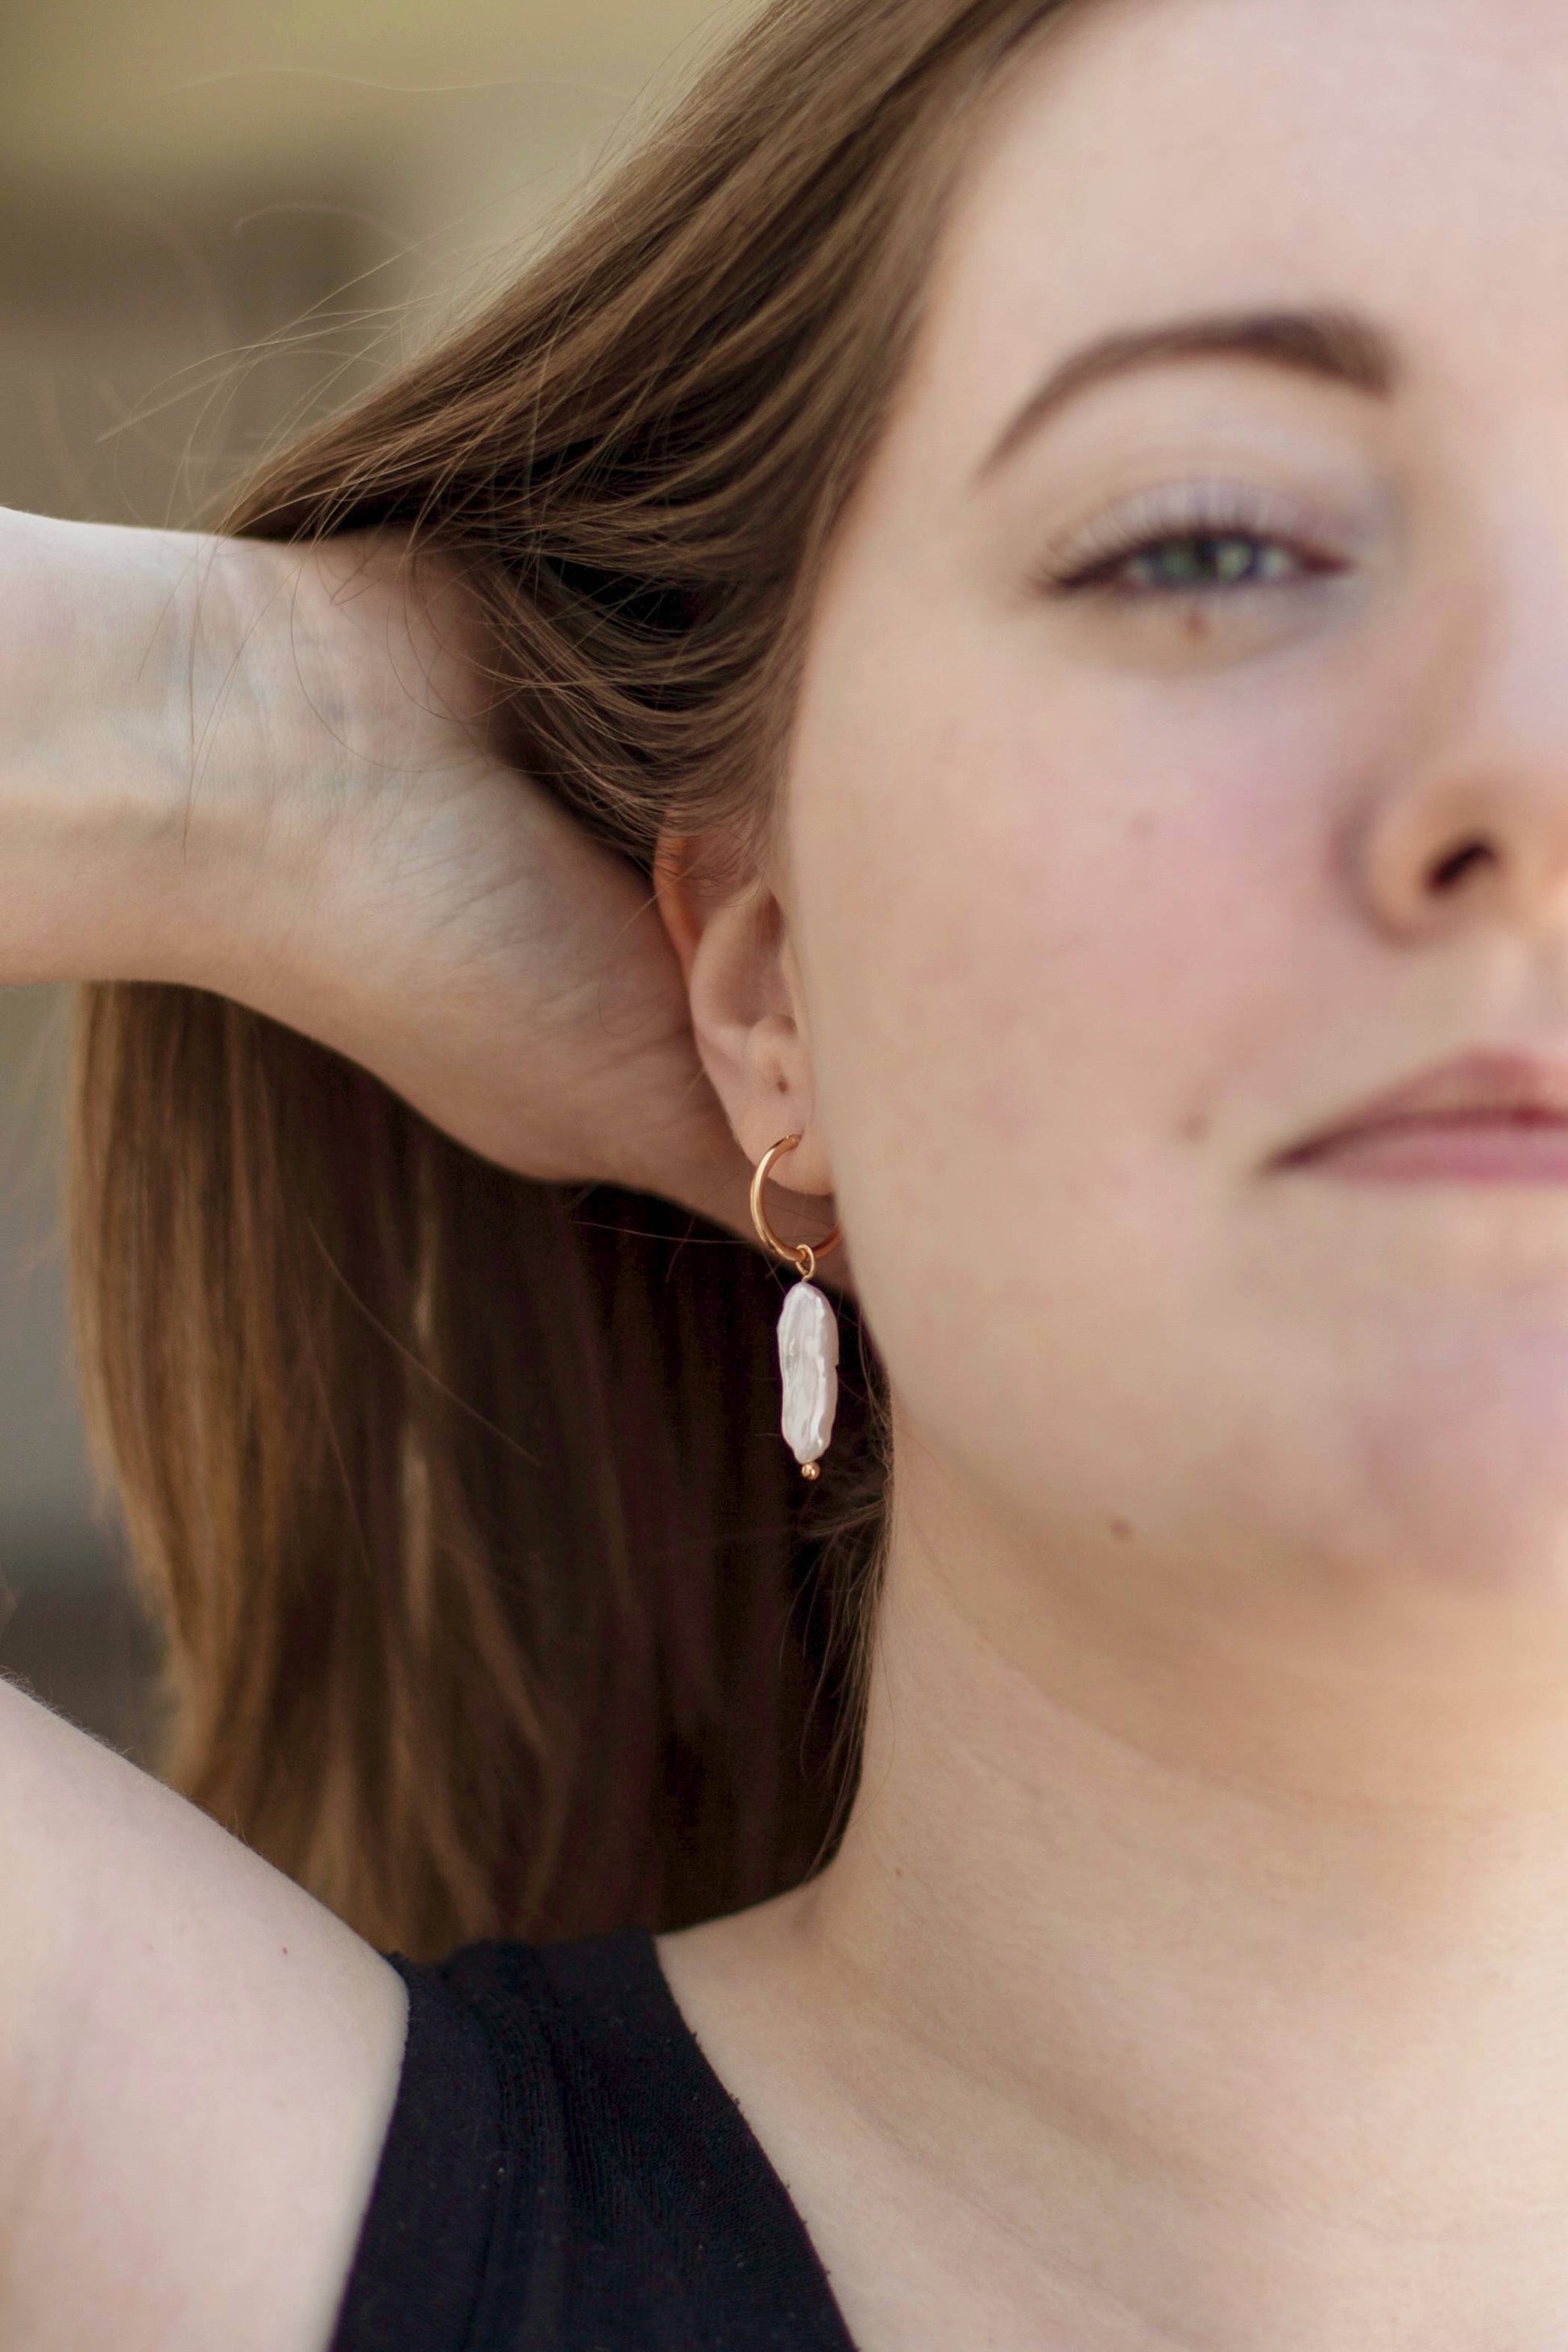 A model wearing the earrings, to showcase the true size and how the pearl accentuates her neck.